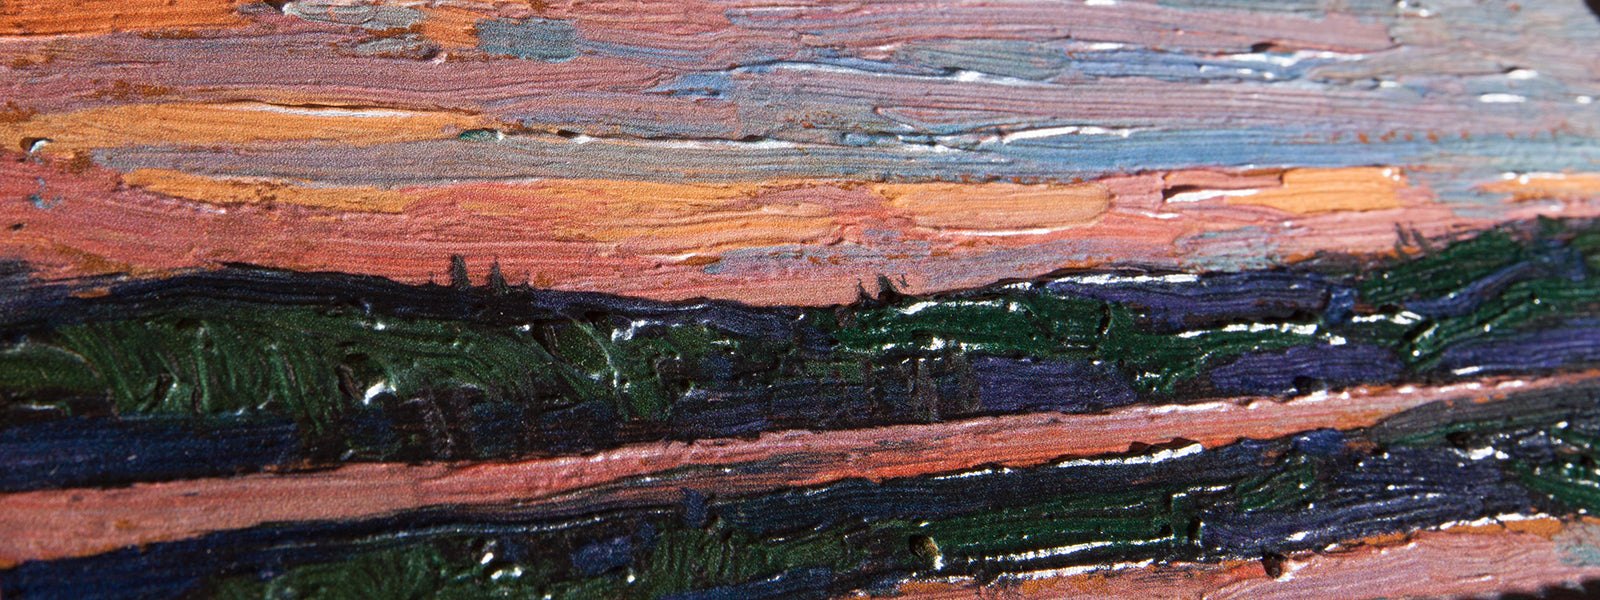 Sunset Sky, by Tom Thomson Painting Close Up